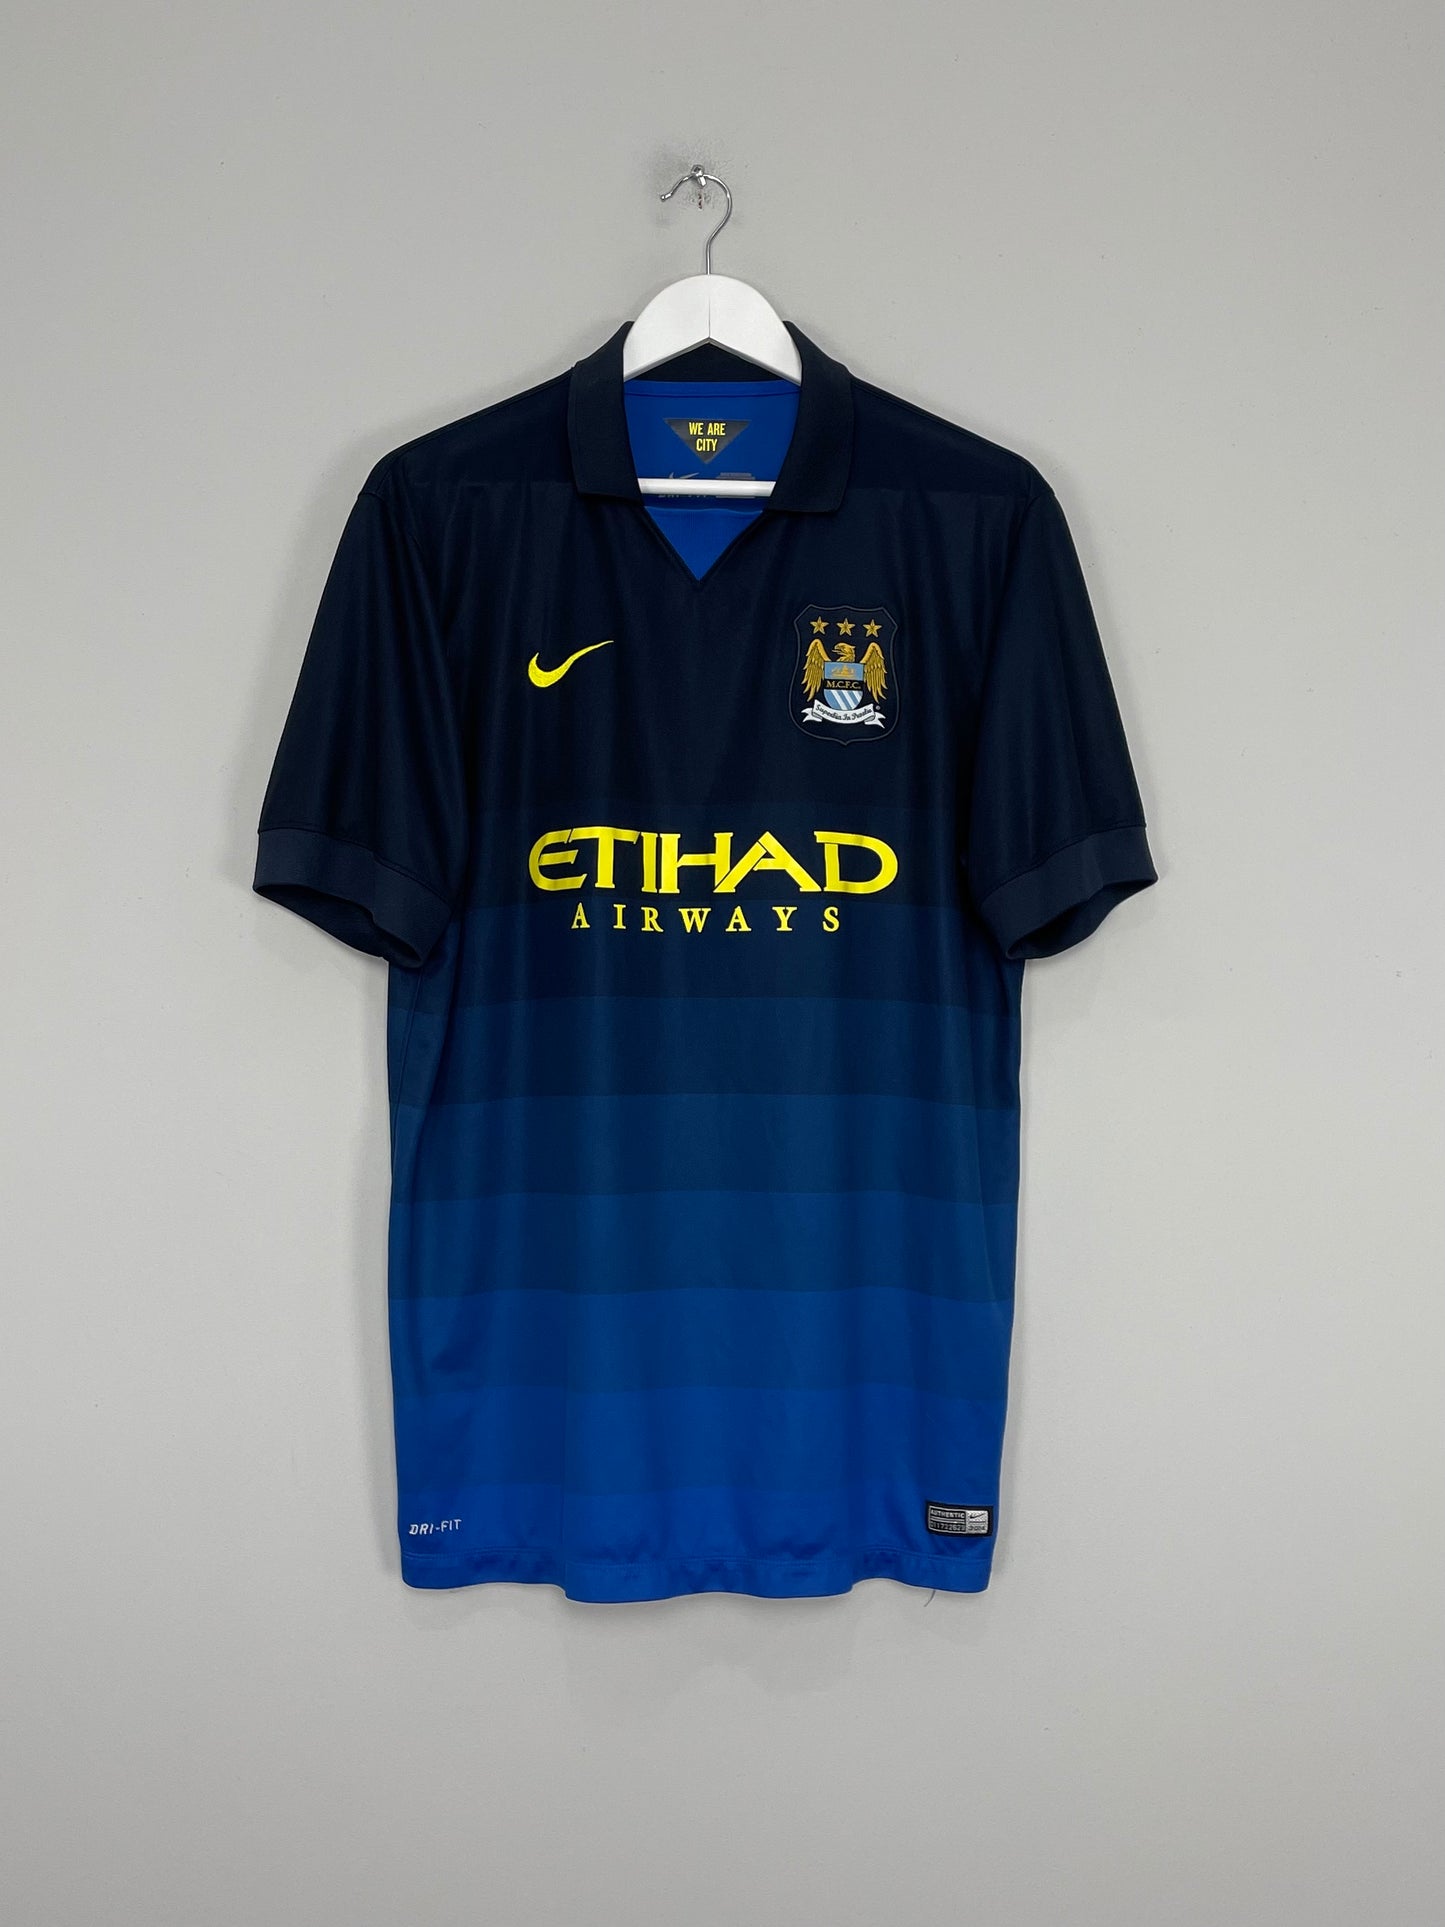 Image of the Manchester City shirt from the 2014/15 season